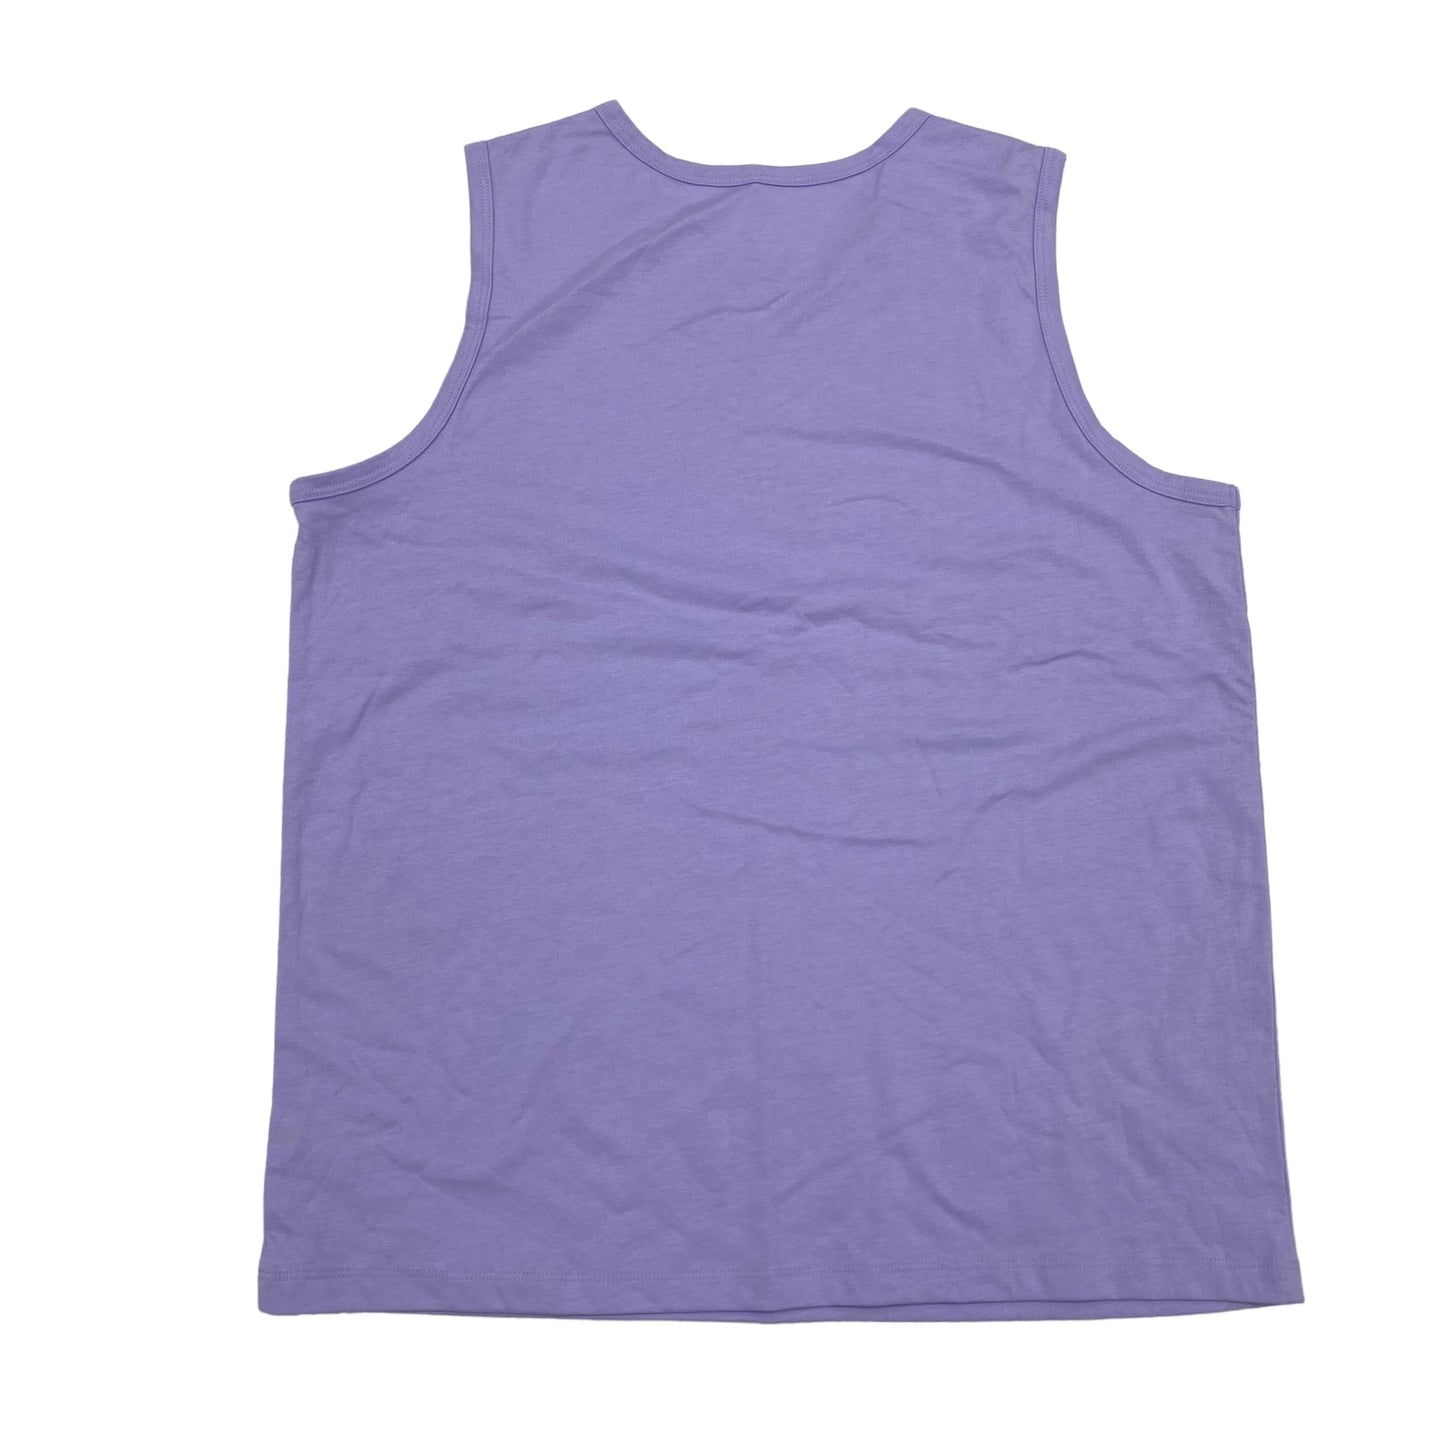 PURPLE TANK TOP by CLOTHES MENTOR Size:XL